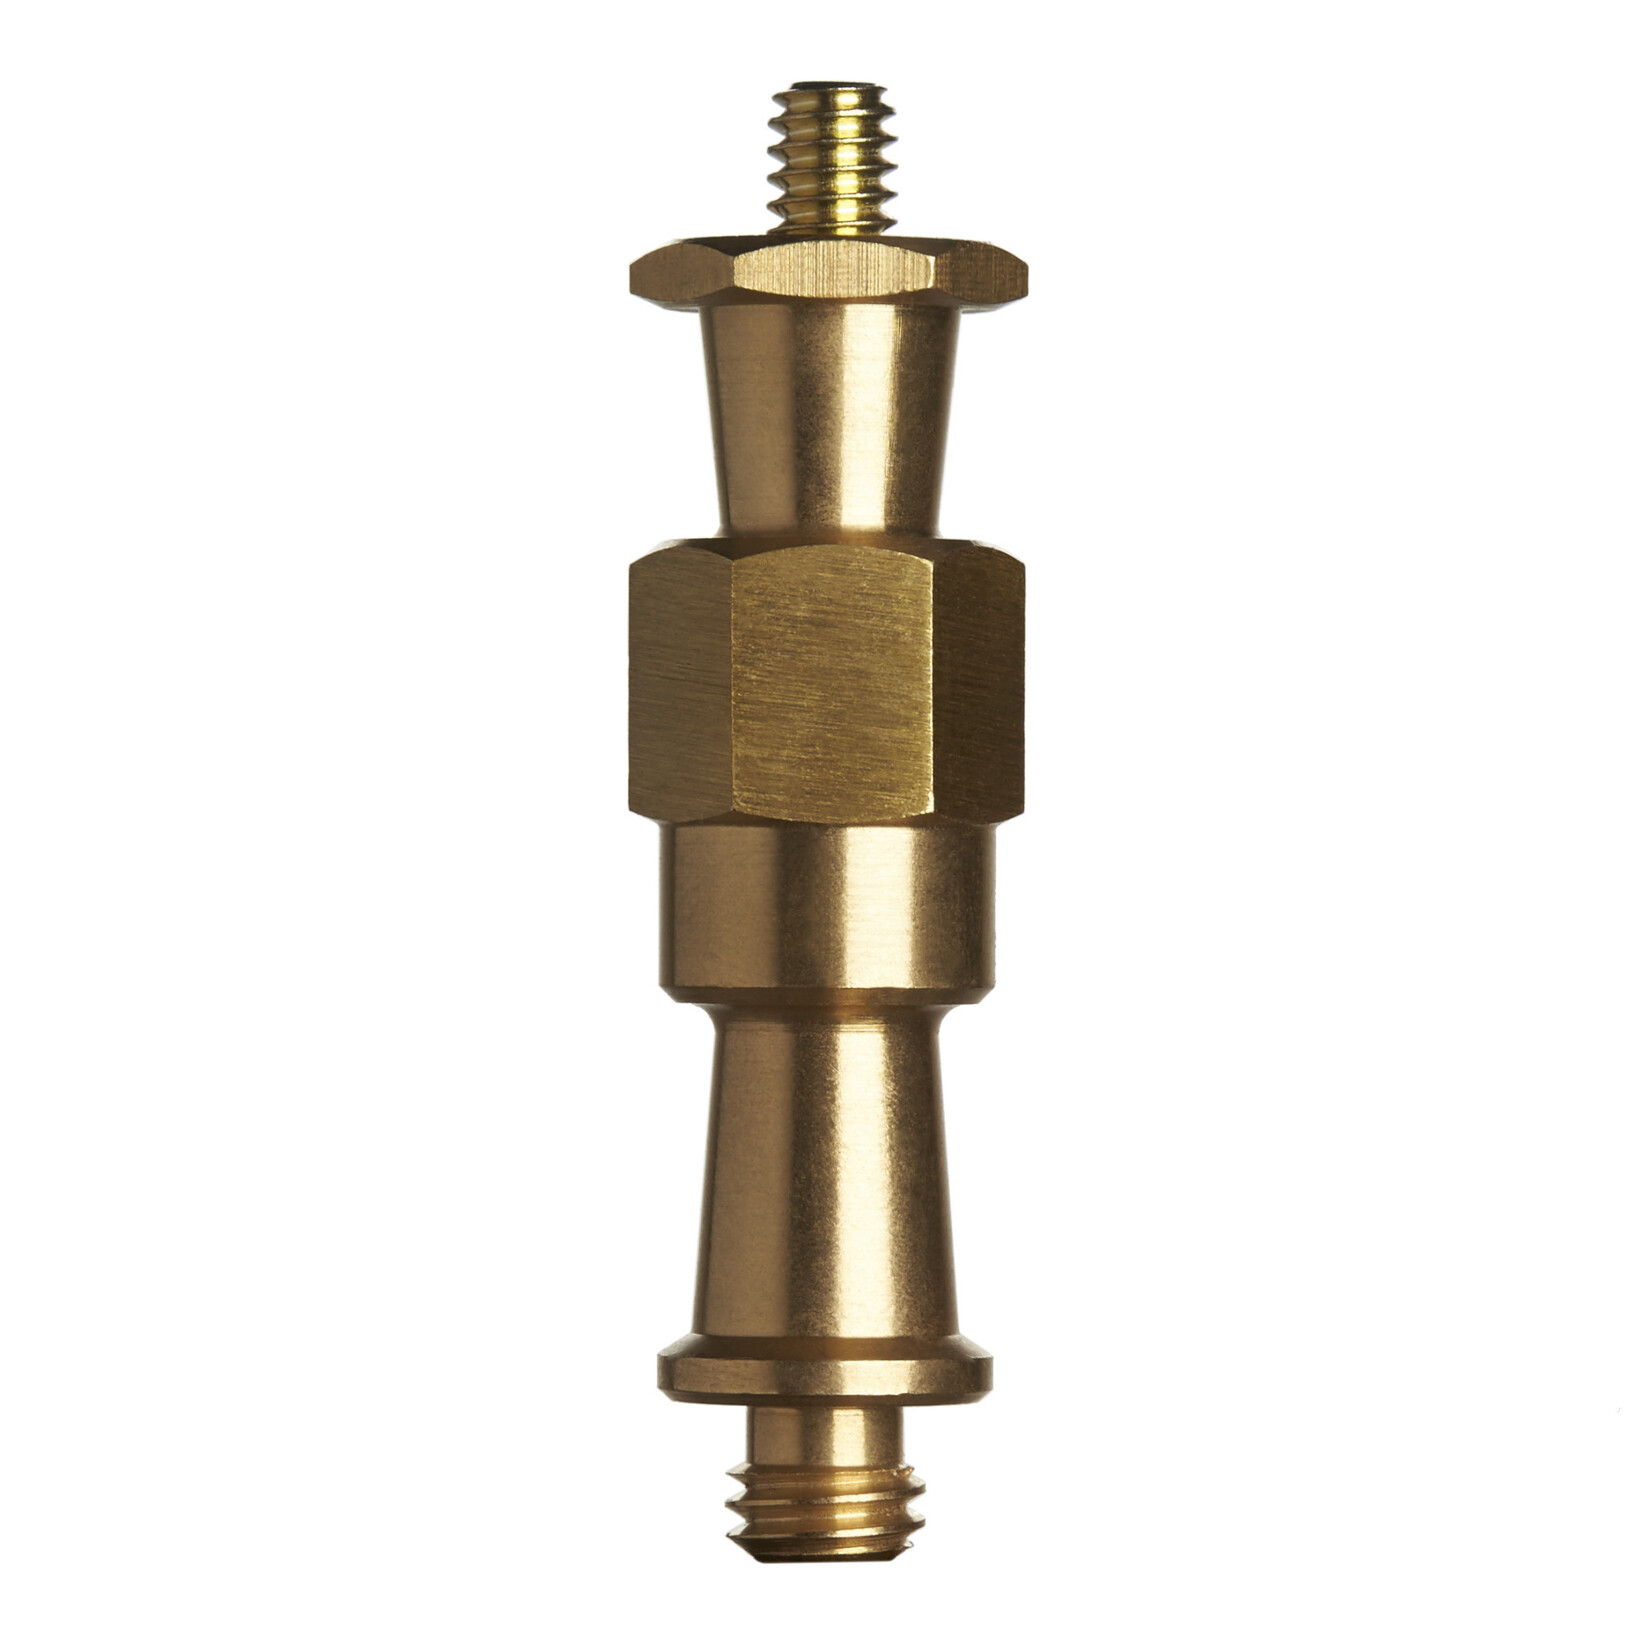 Promaster PRO Double Brass Stud 1/4-20 M to 3/8 M